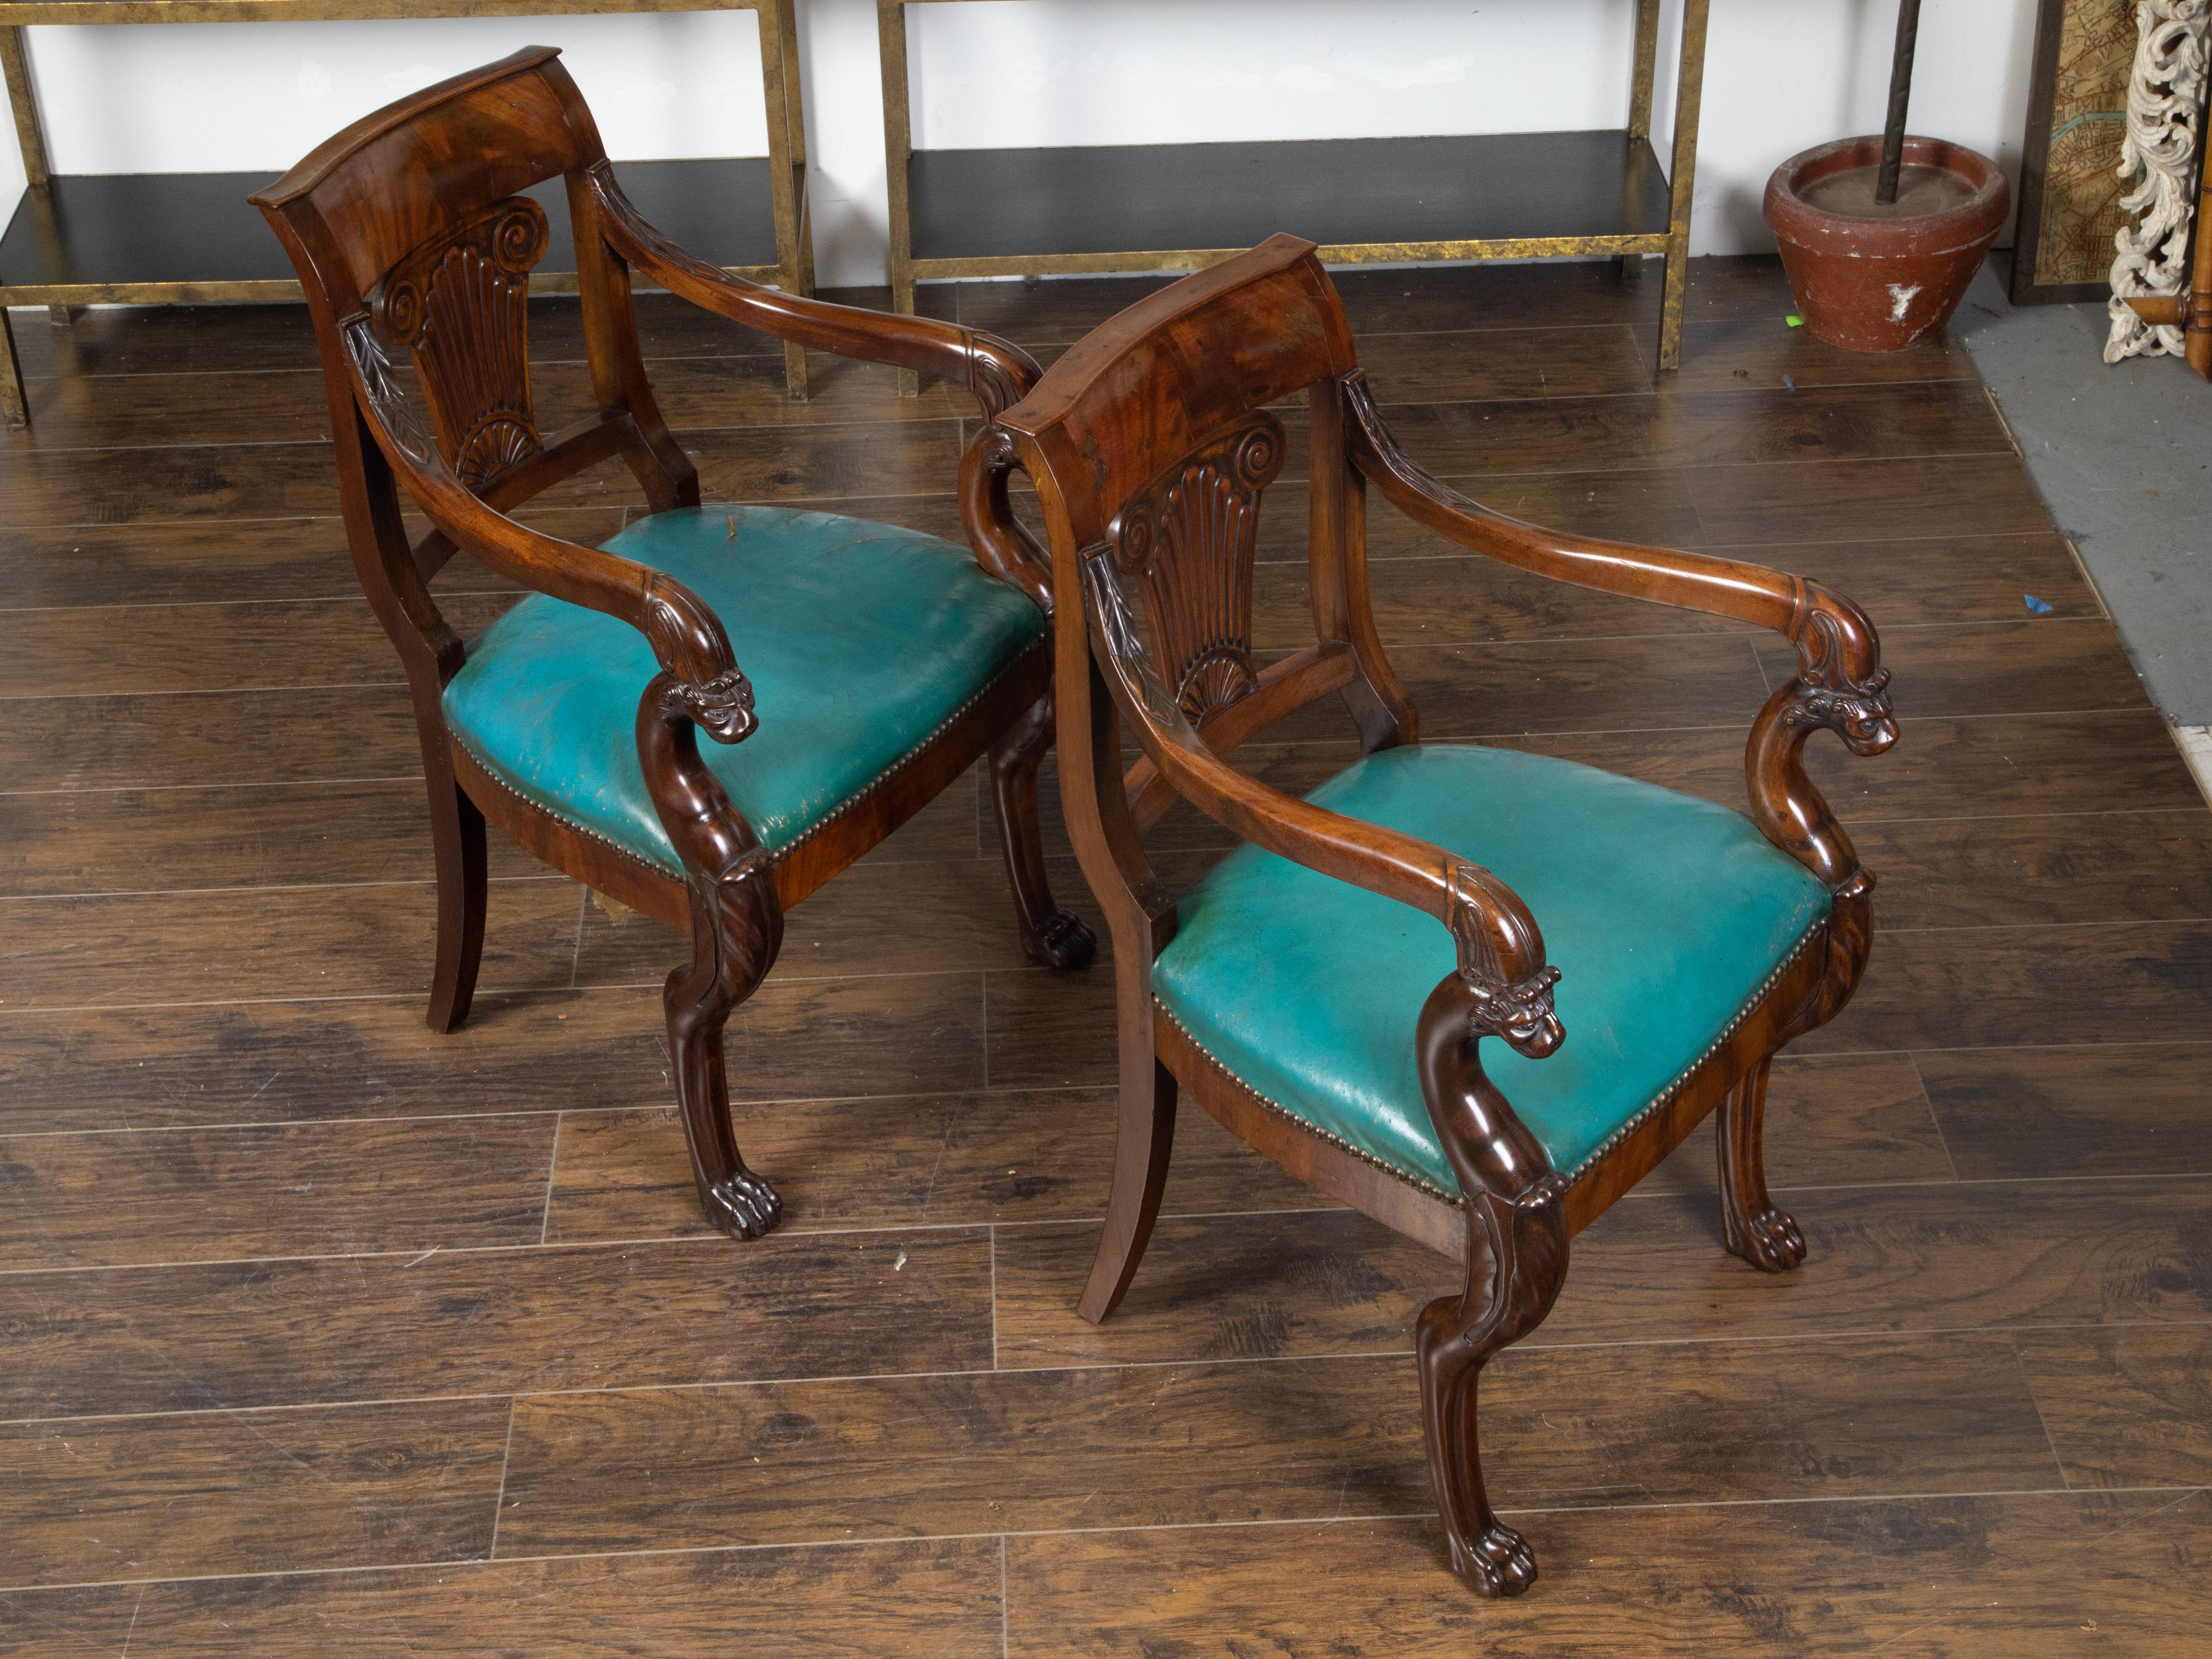 Pair of English Regency 1840s Mahogany Chairs with Ionic Capitals and Griffons For Sale 9